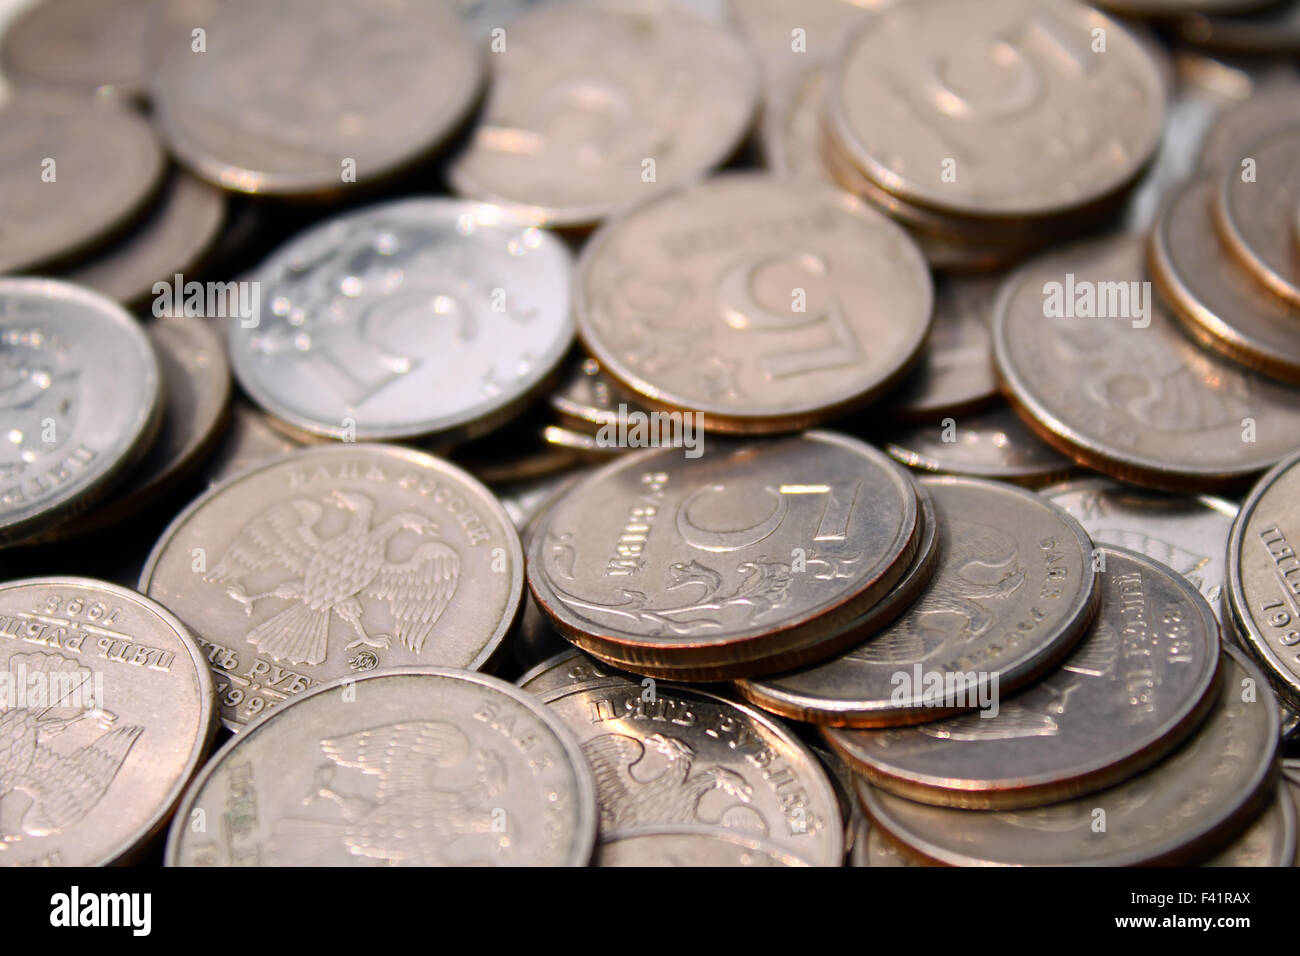 five rouble coins Stock Photo